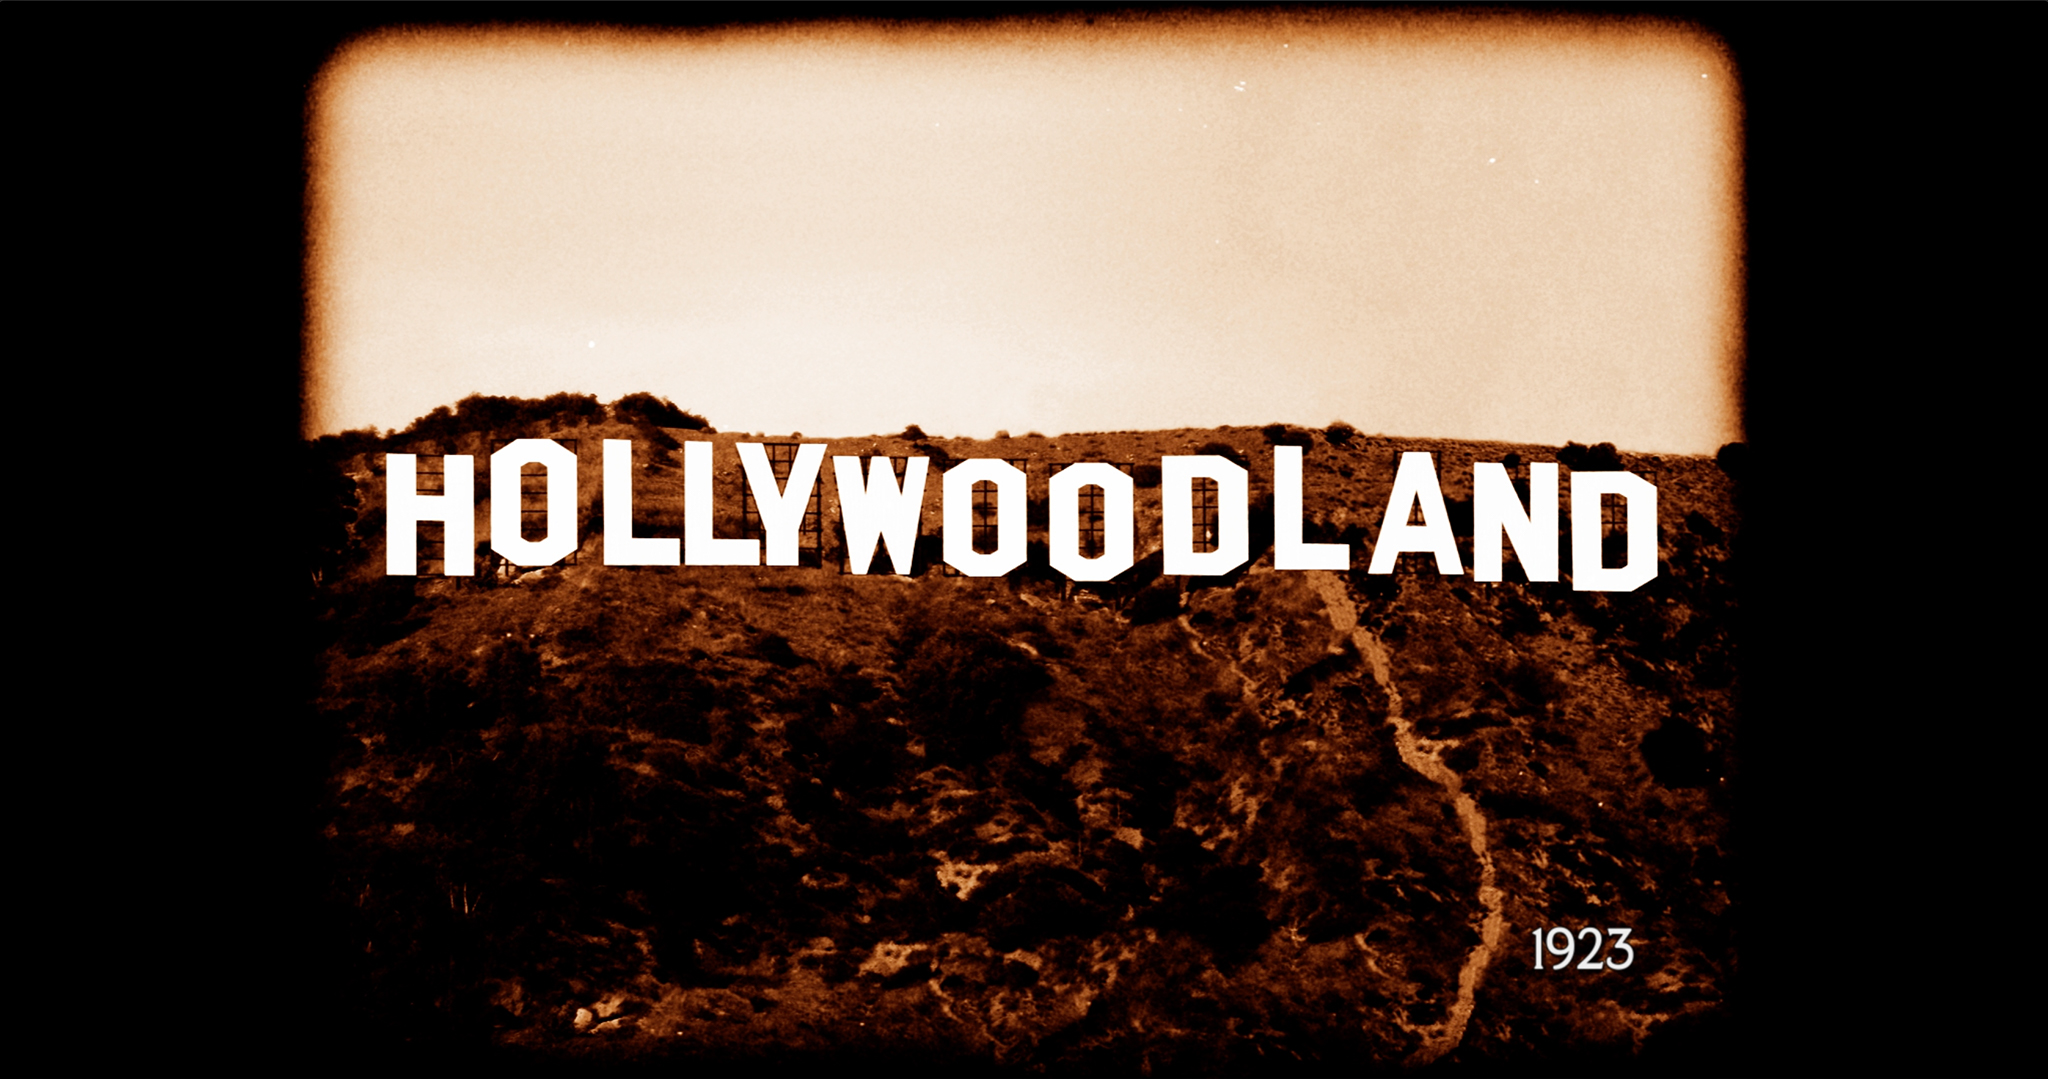 A Brief History of Hollywood (Director ~ Writer ~ Producer)